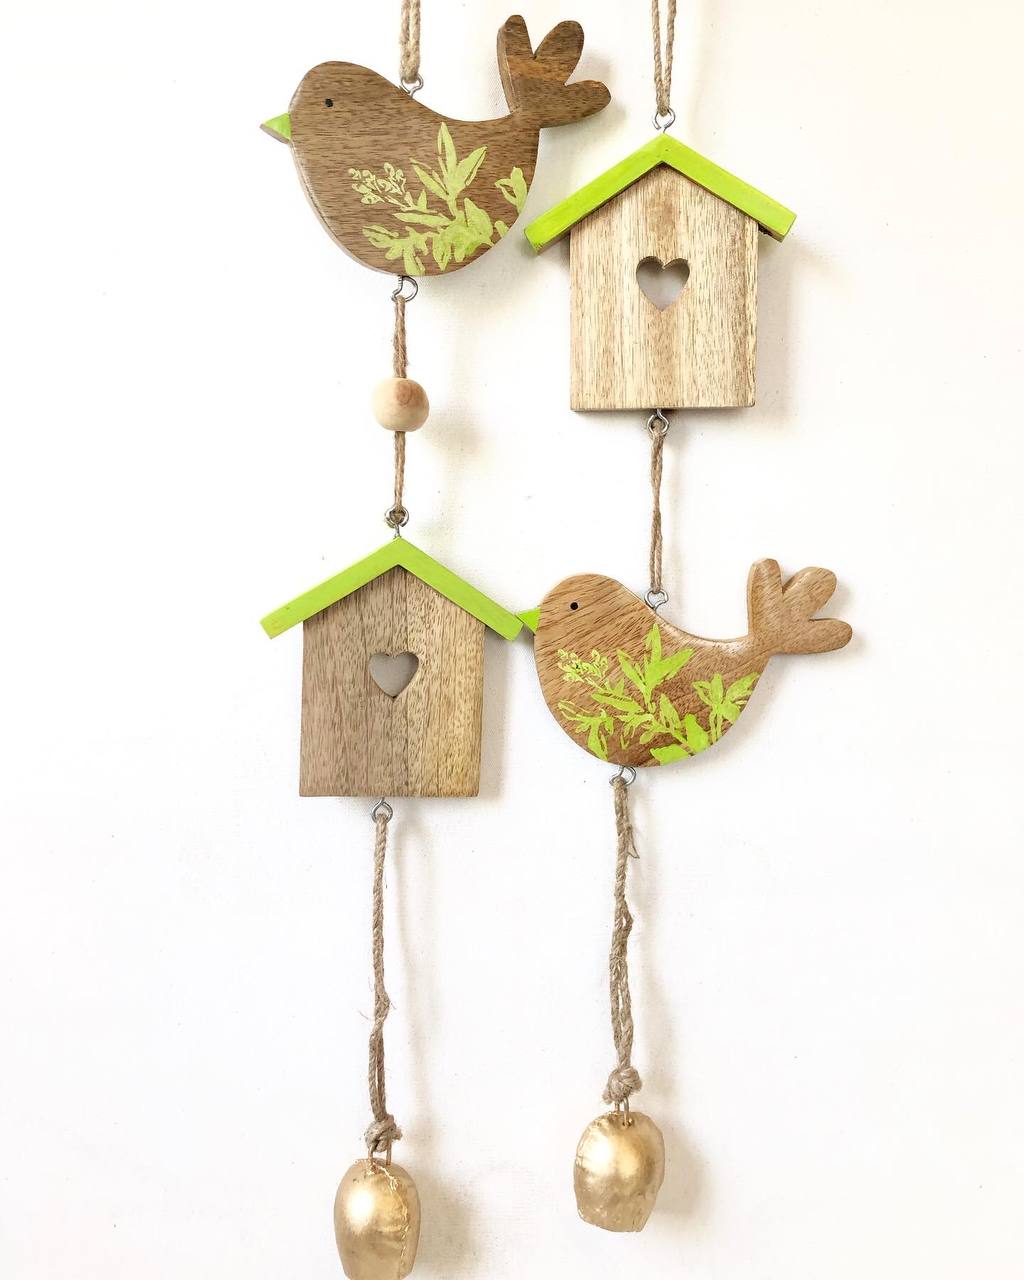 Bird and house hanging